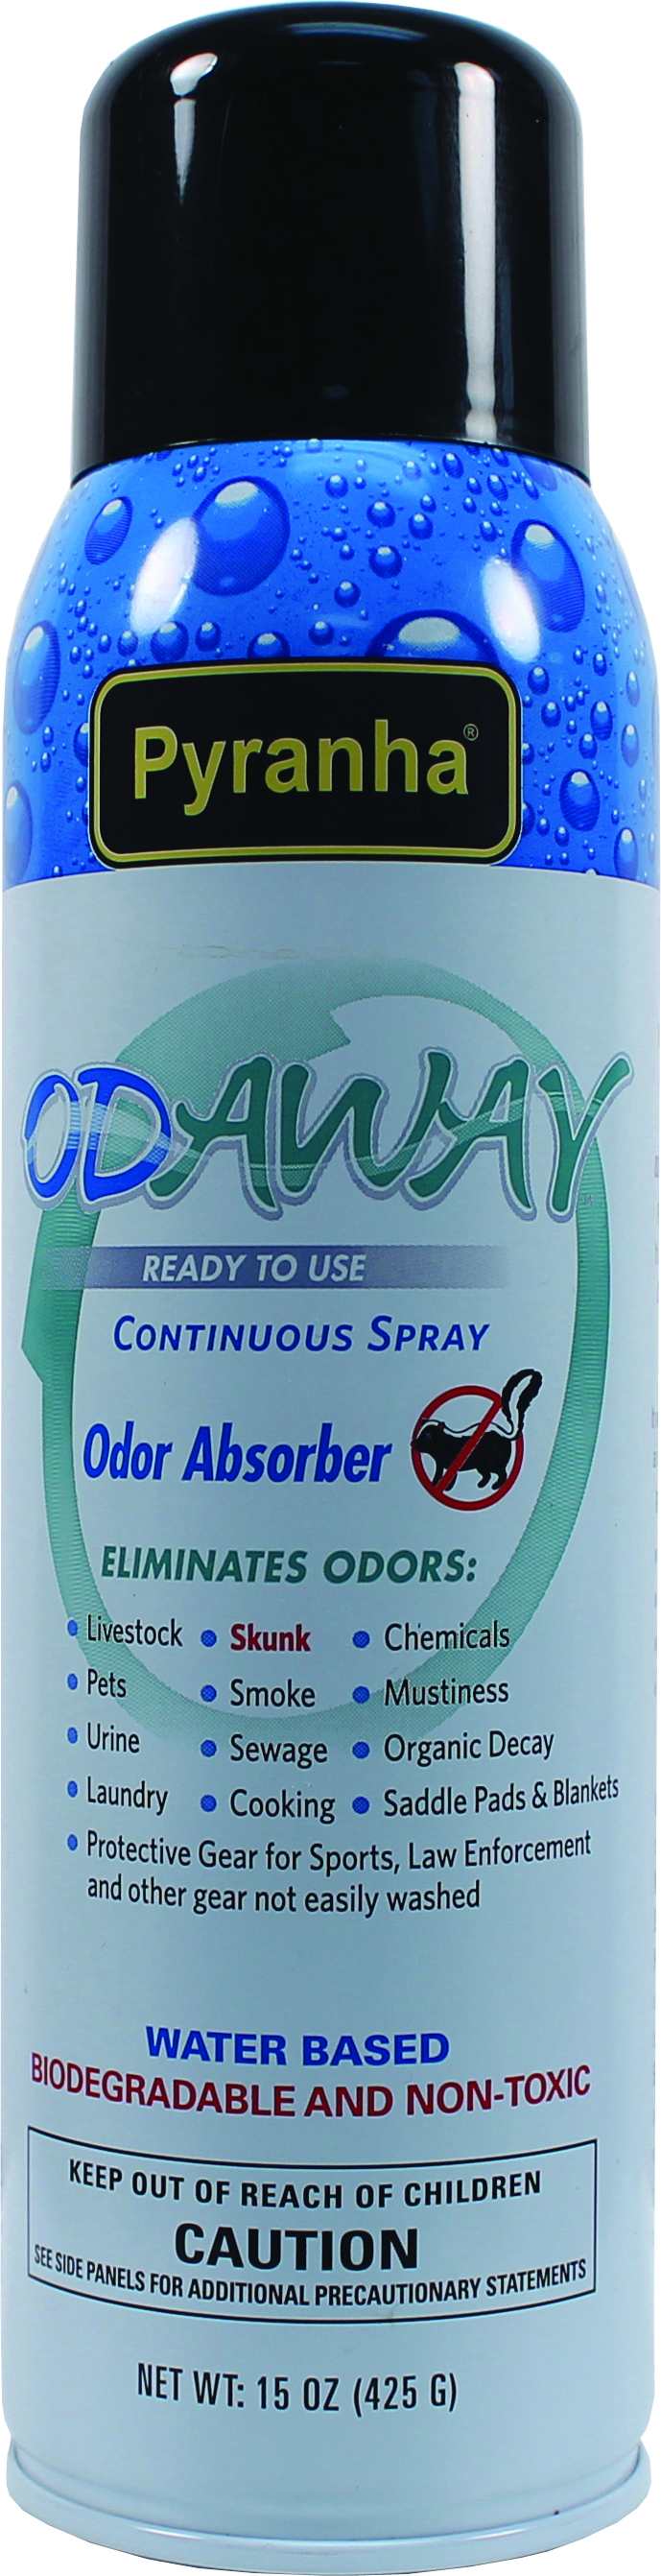 ODAWAY READY TO USE ODOR ABSORBER